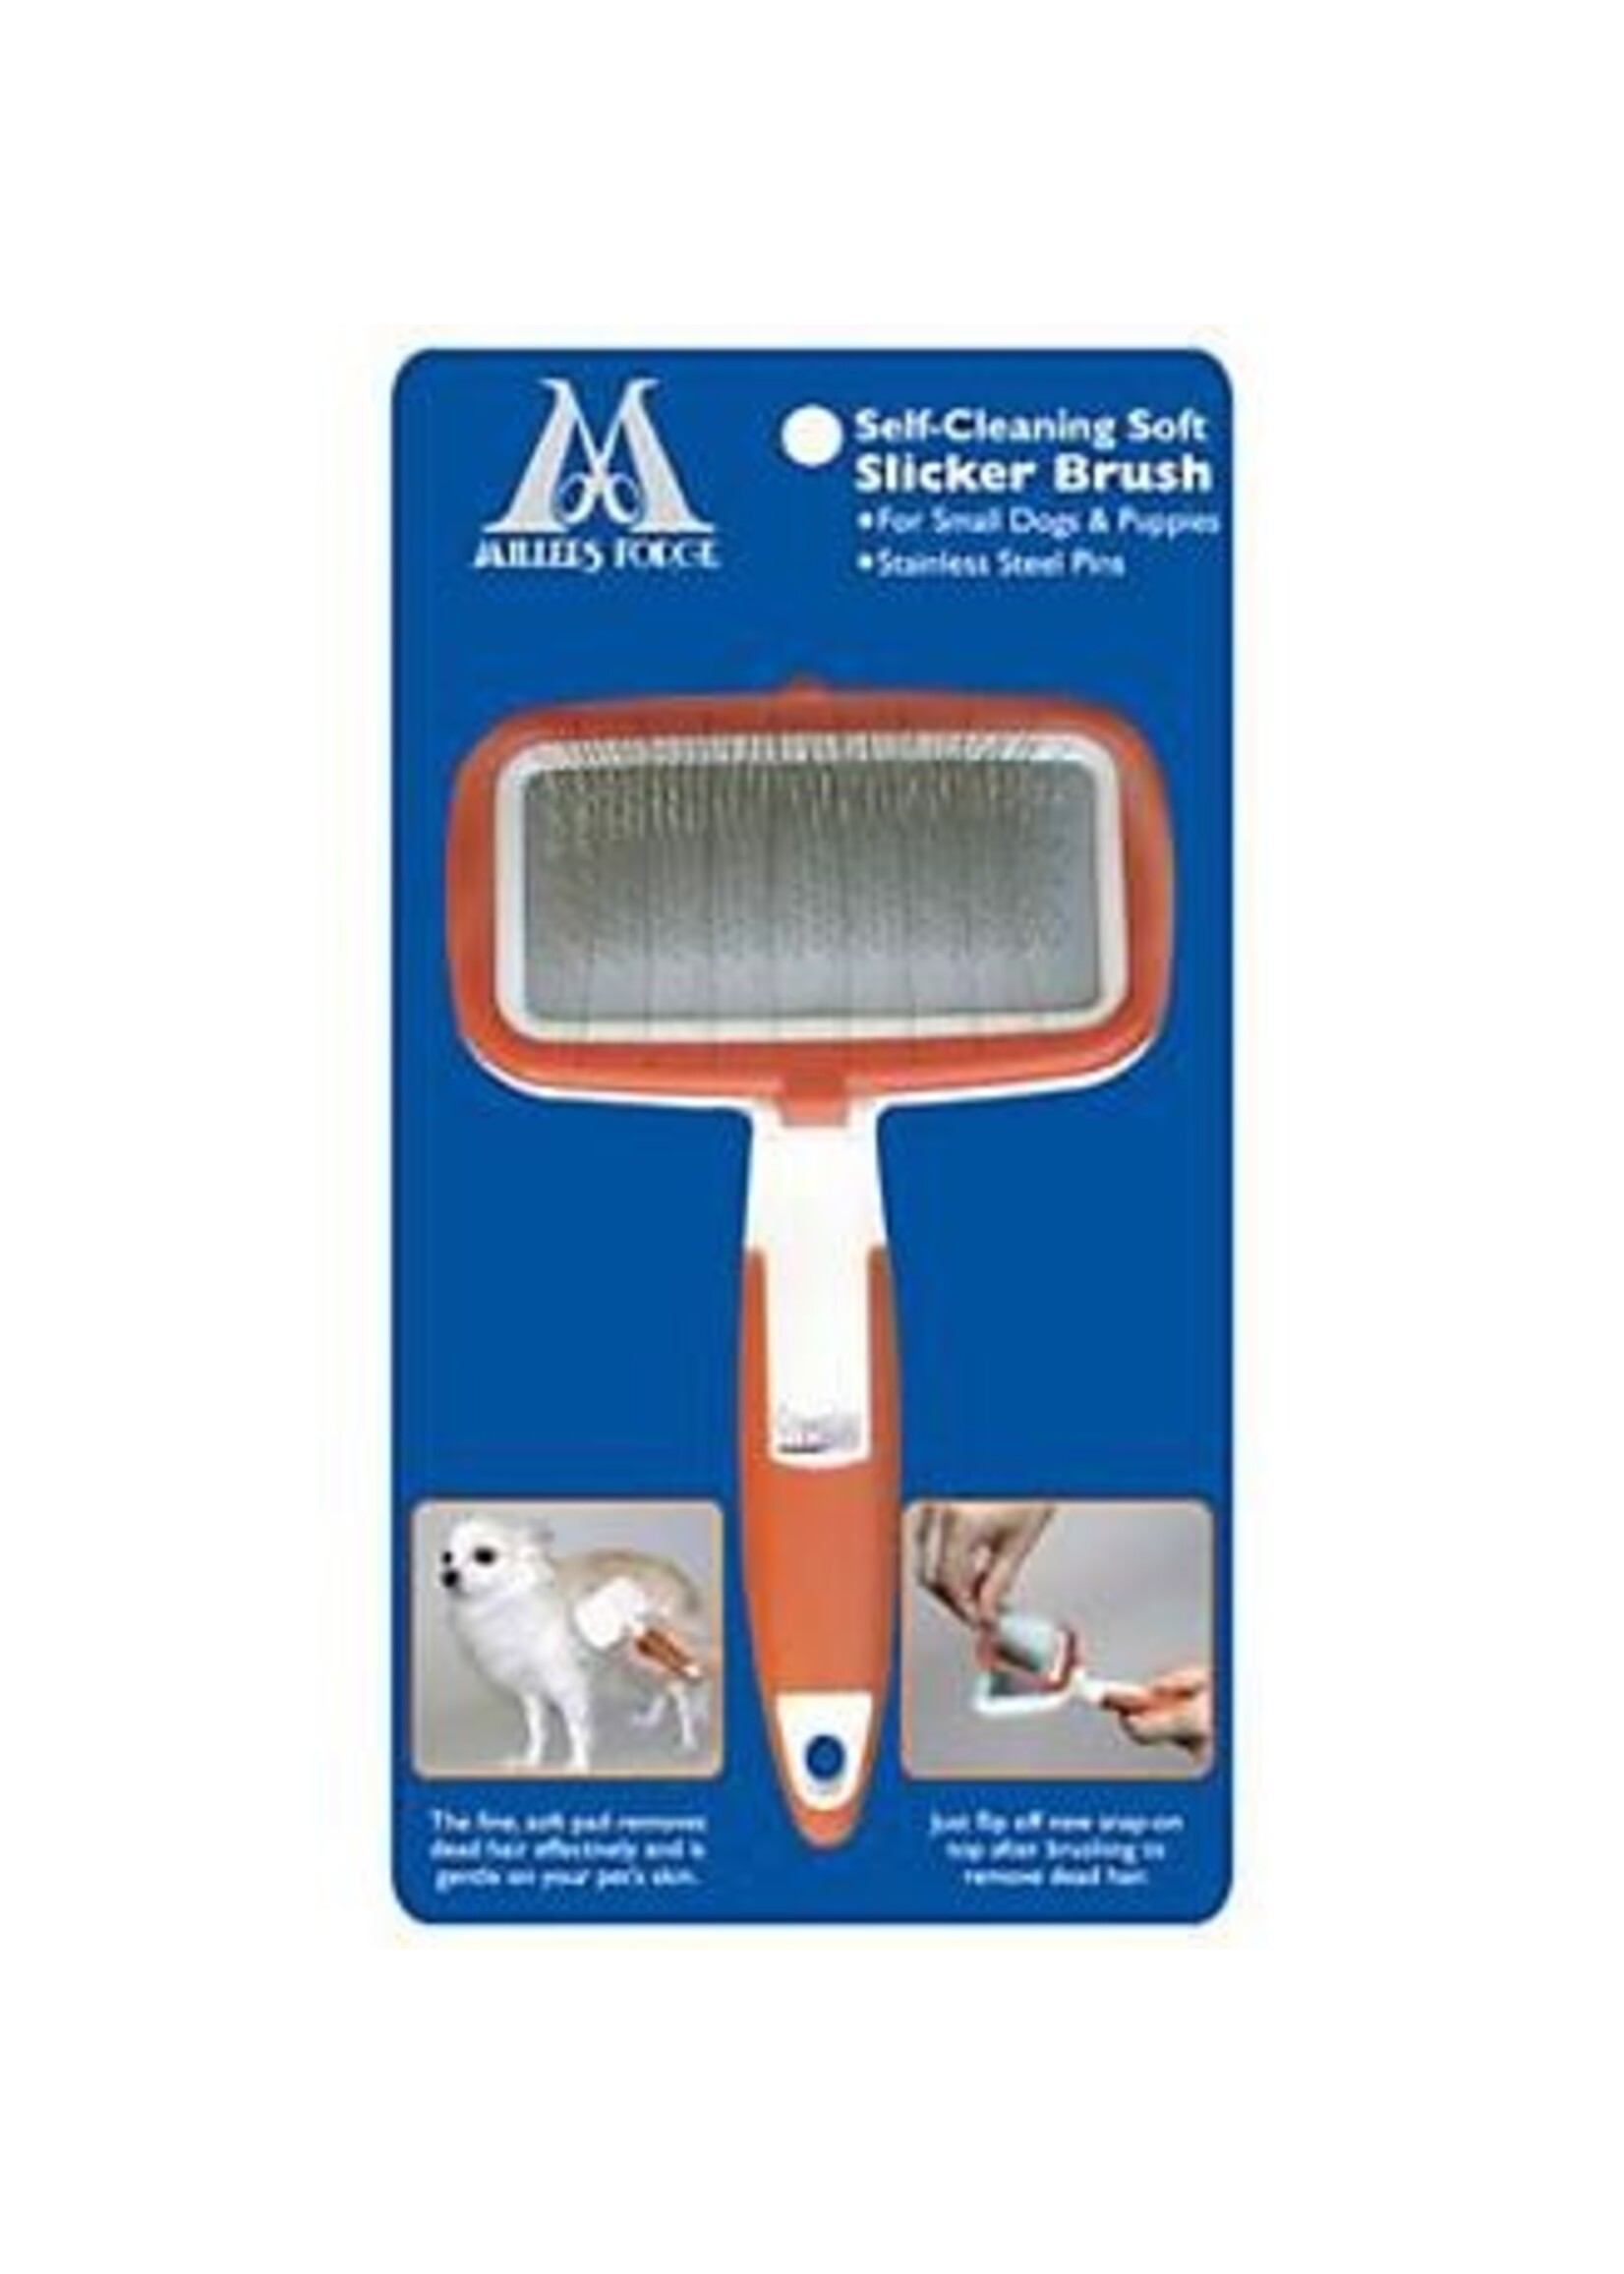 Millers Forge Millers Forge Self Cleaning Slicker SM